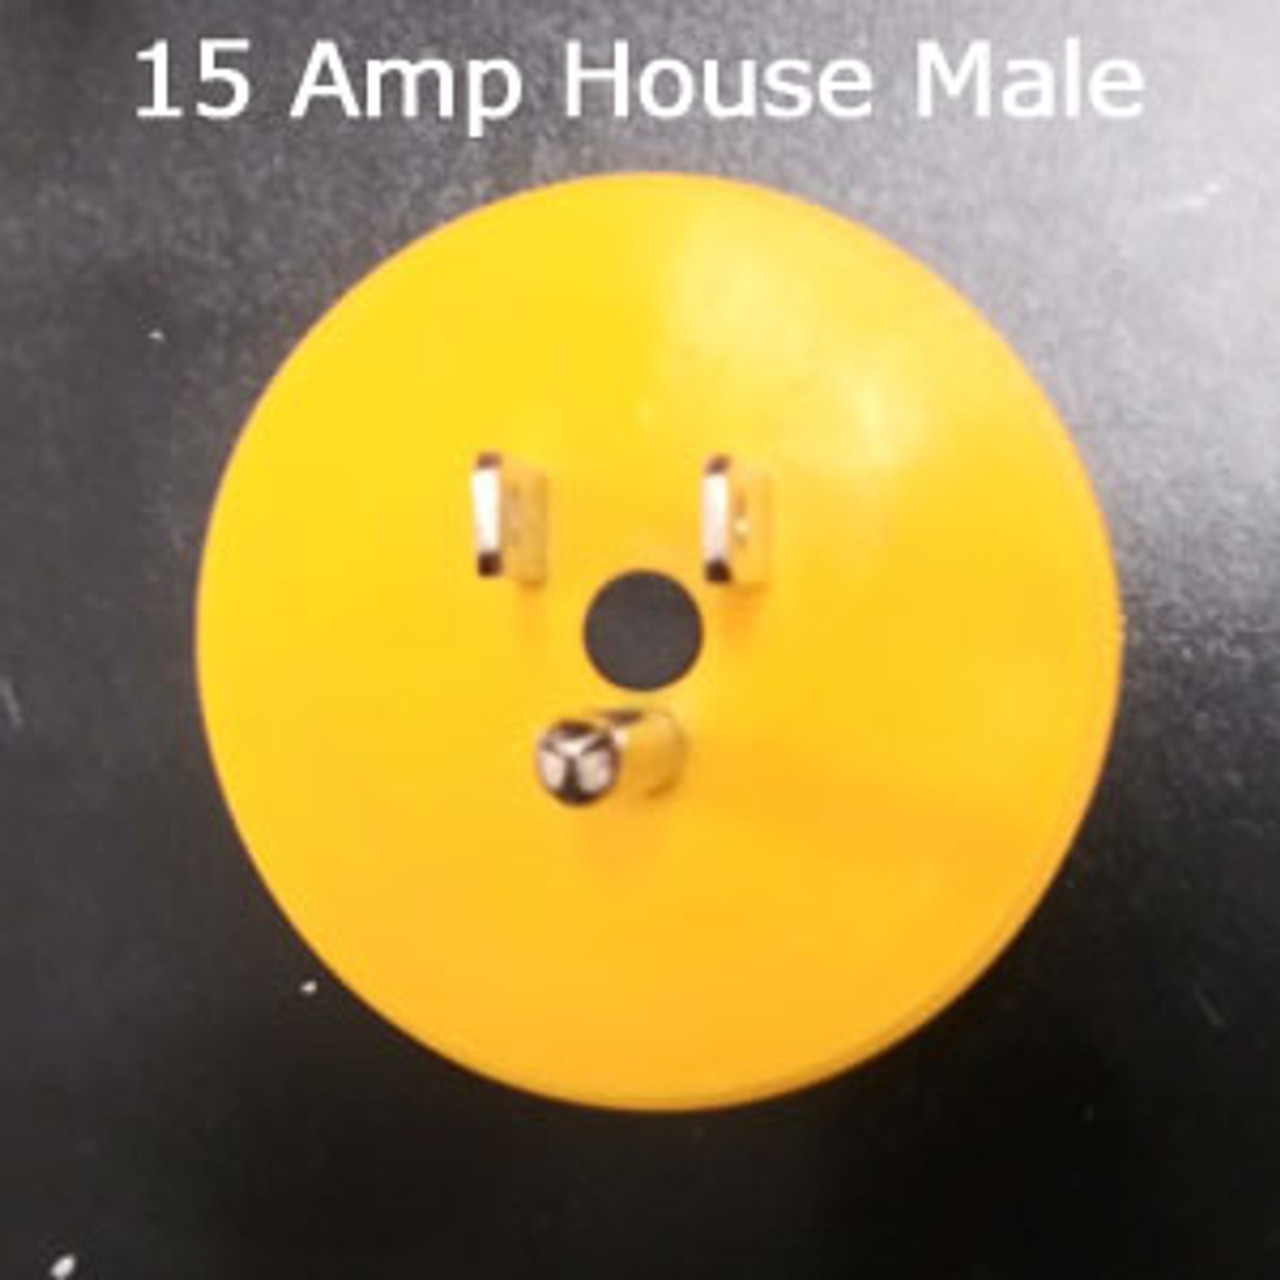 30 Amp Female to 15 Amp Household Male